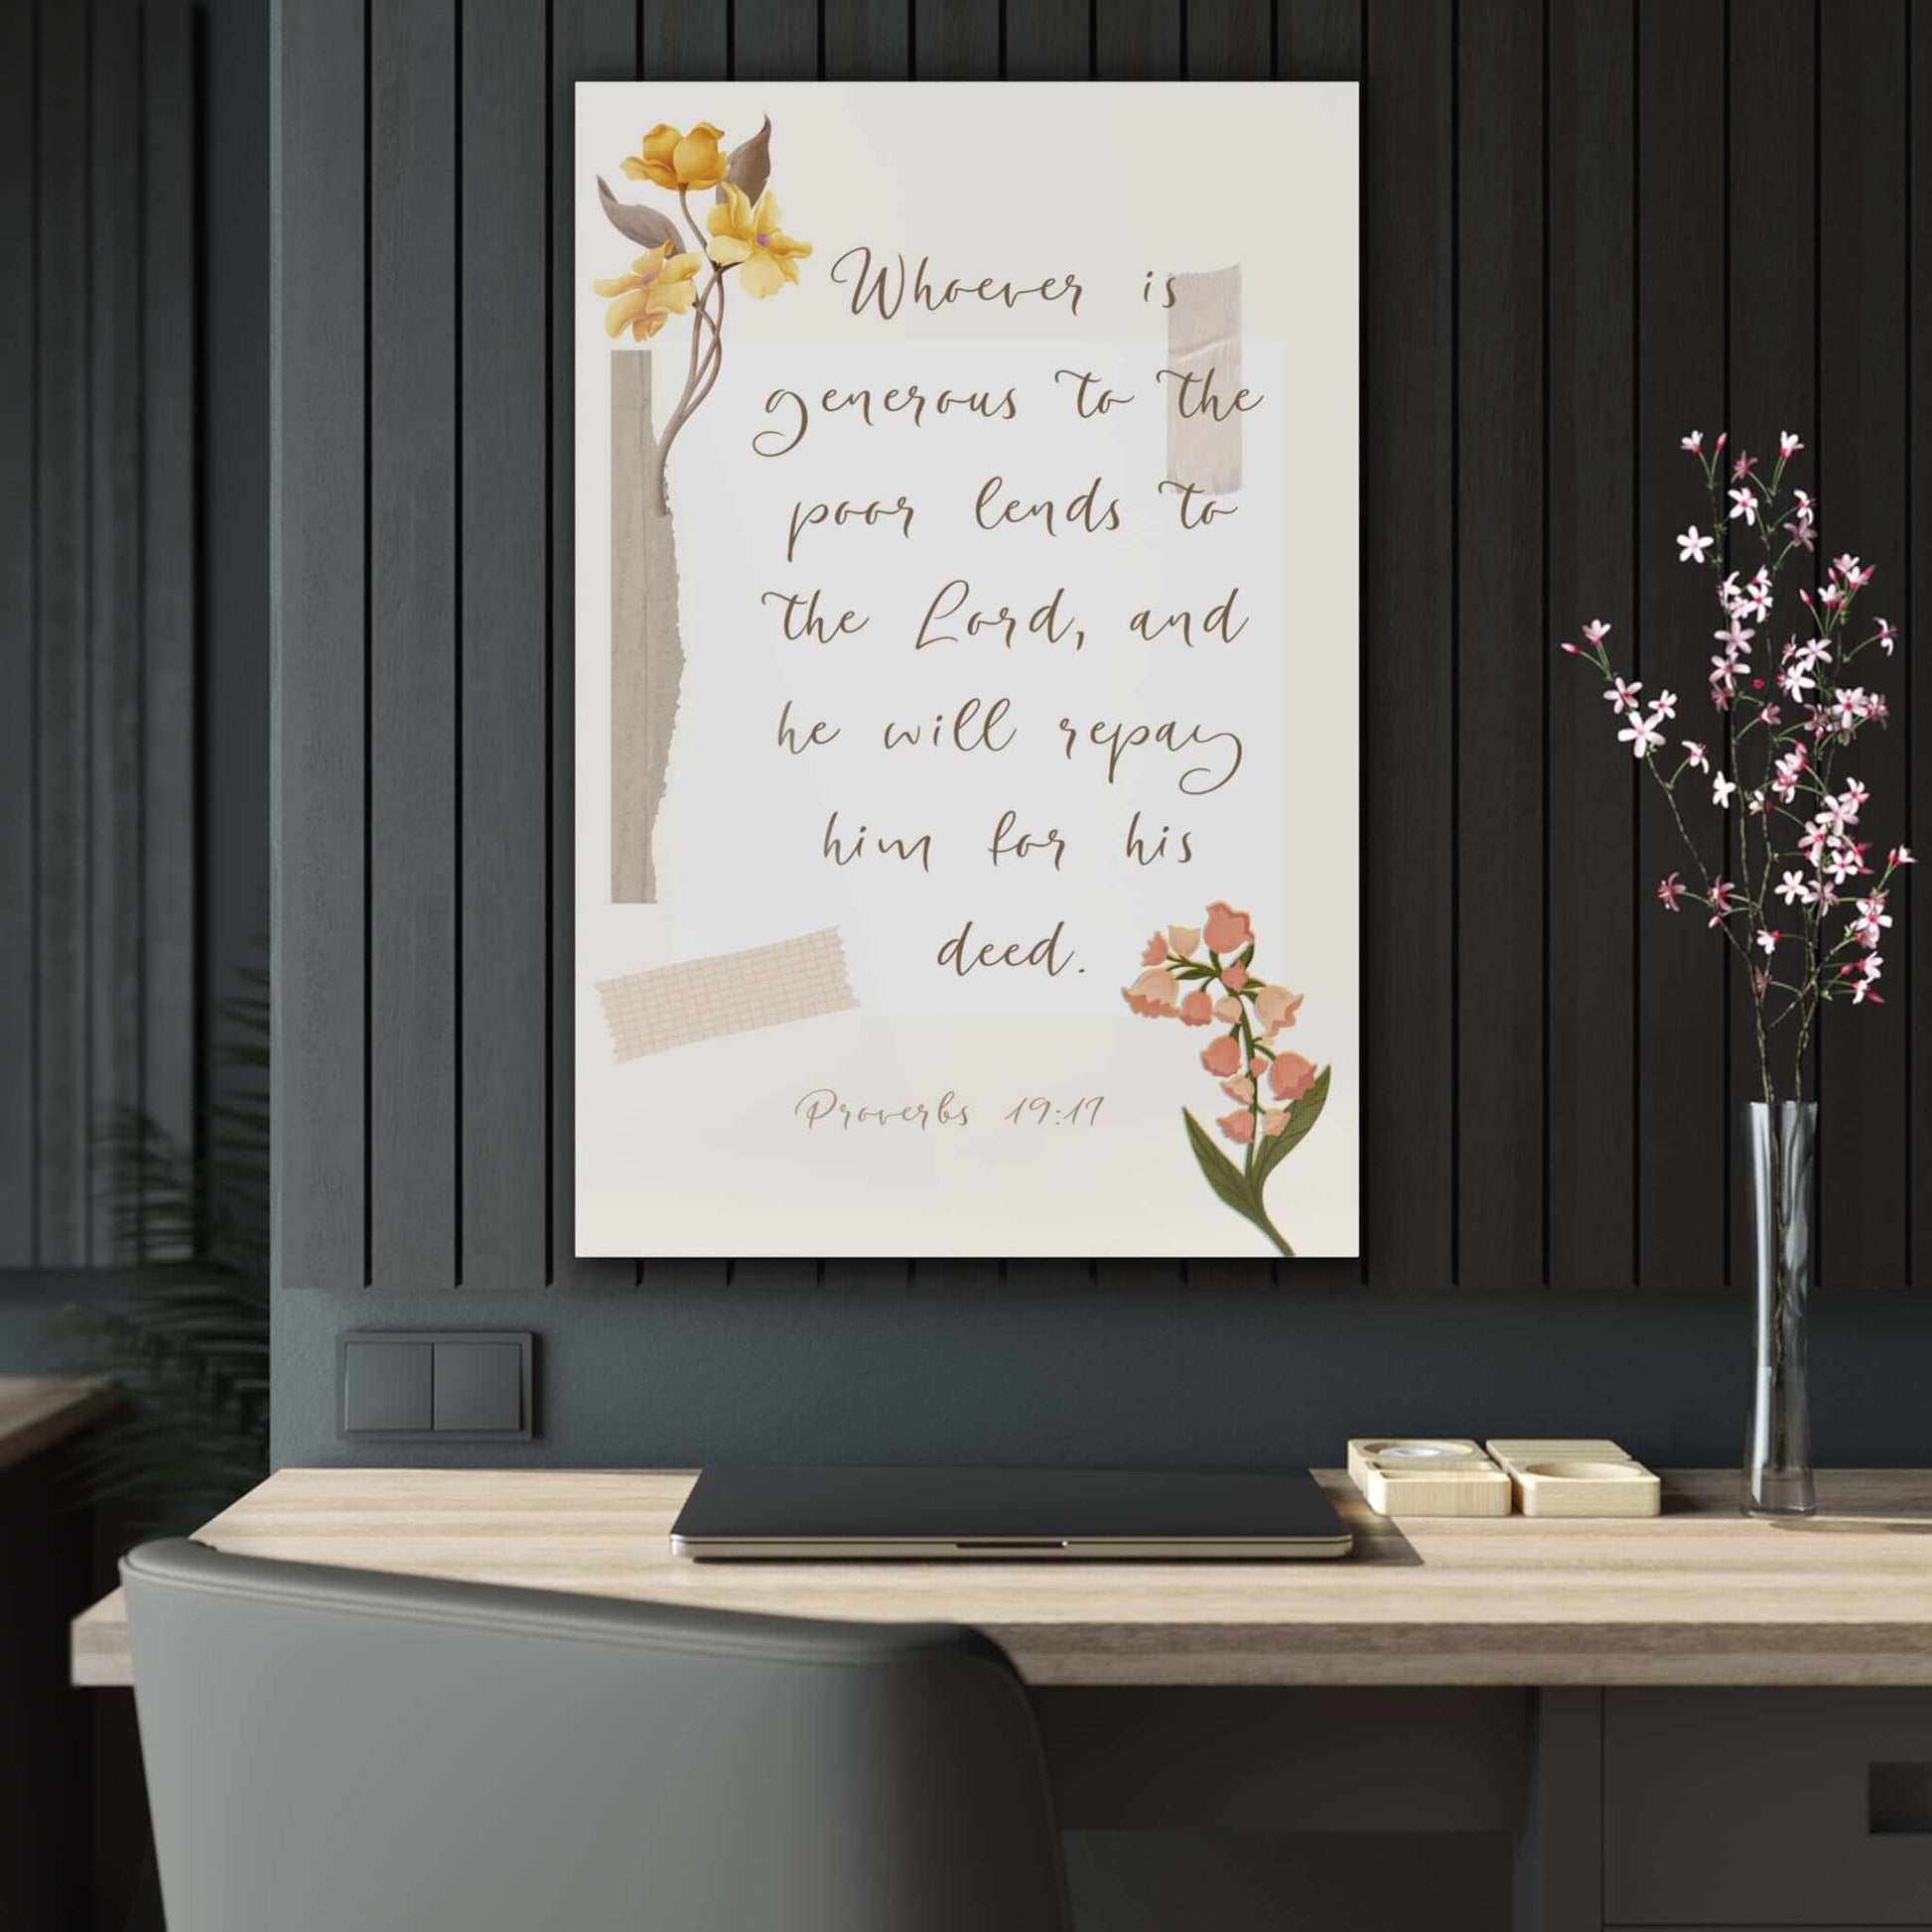 Dazzling Art for Room: "Generous to the Poor" Acrylic Wall Art Print | Art & Wall Decor,Assembled in the USA,Assembled in USA,Decor,Home & Living,Home Decor,Indoor,Made in the USA,Made in USA,Poster